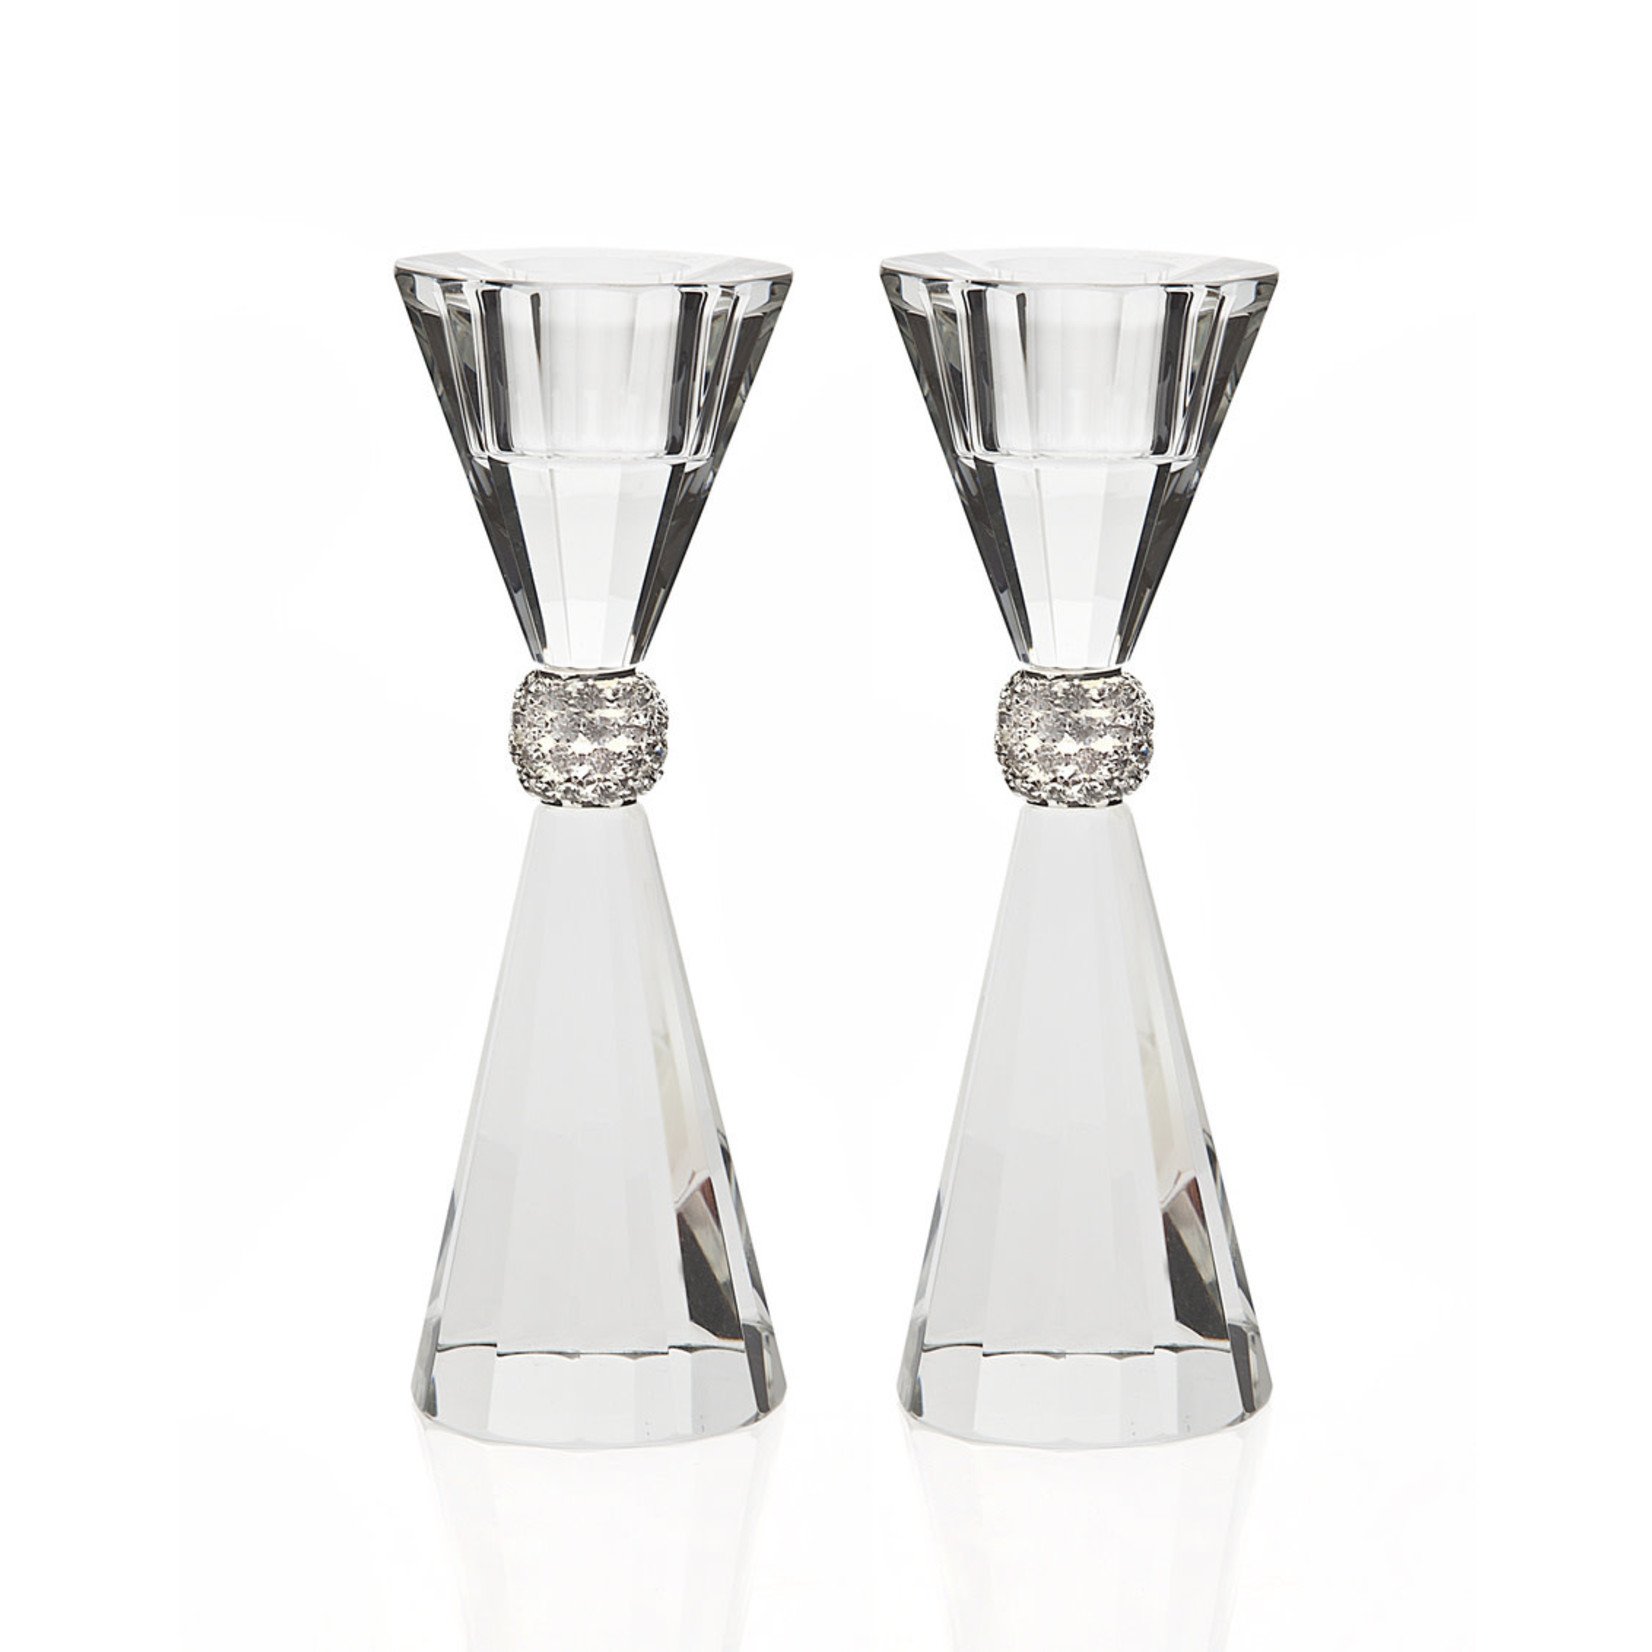 15669 Palazzo 5.5 Bling C/s Candle Sticks